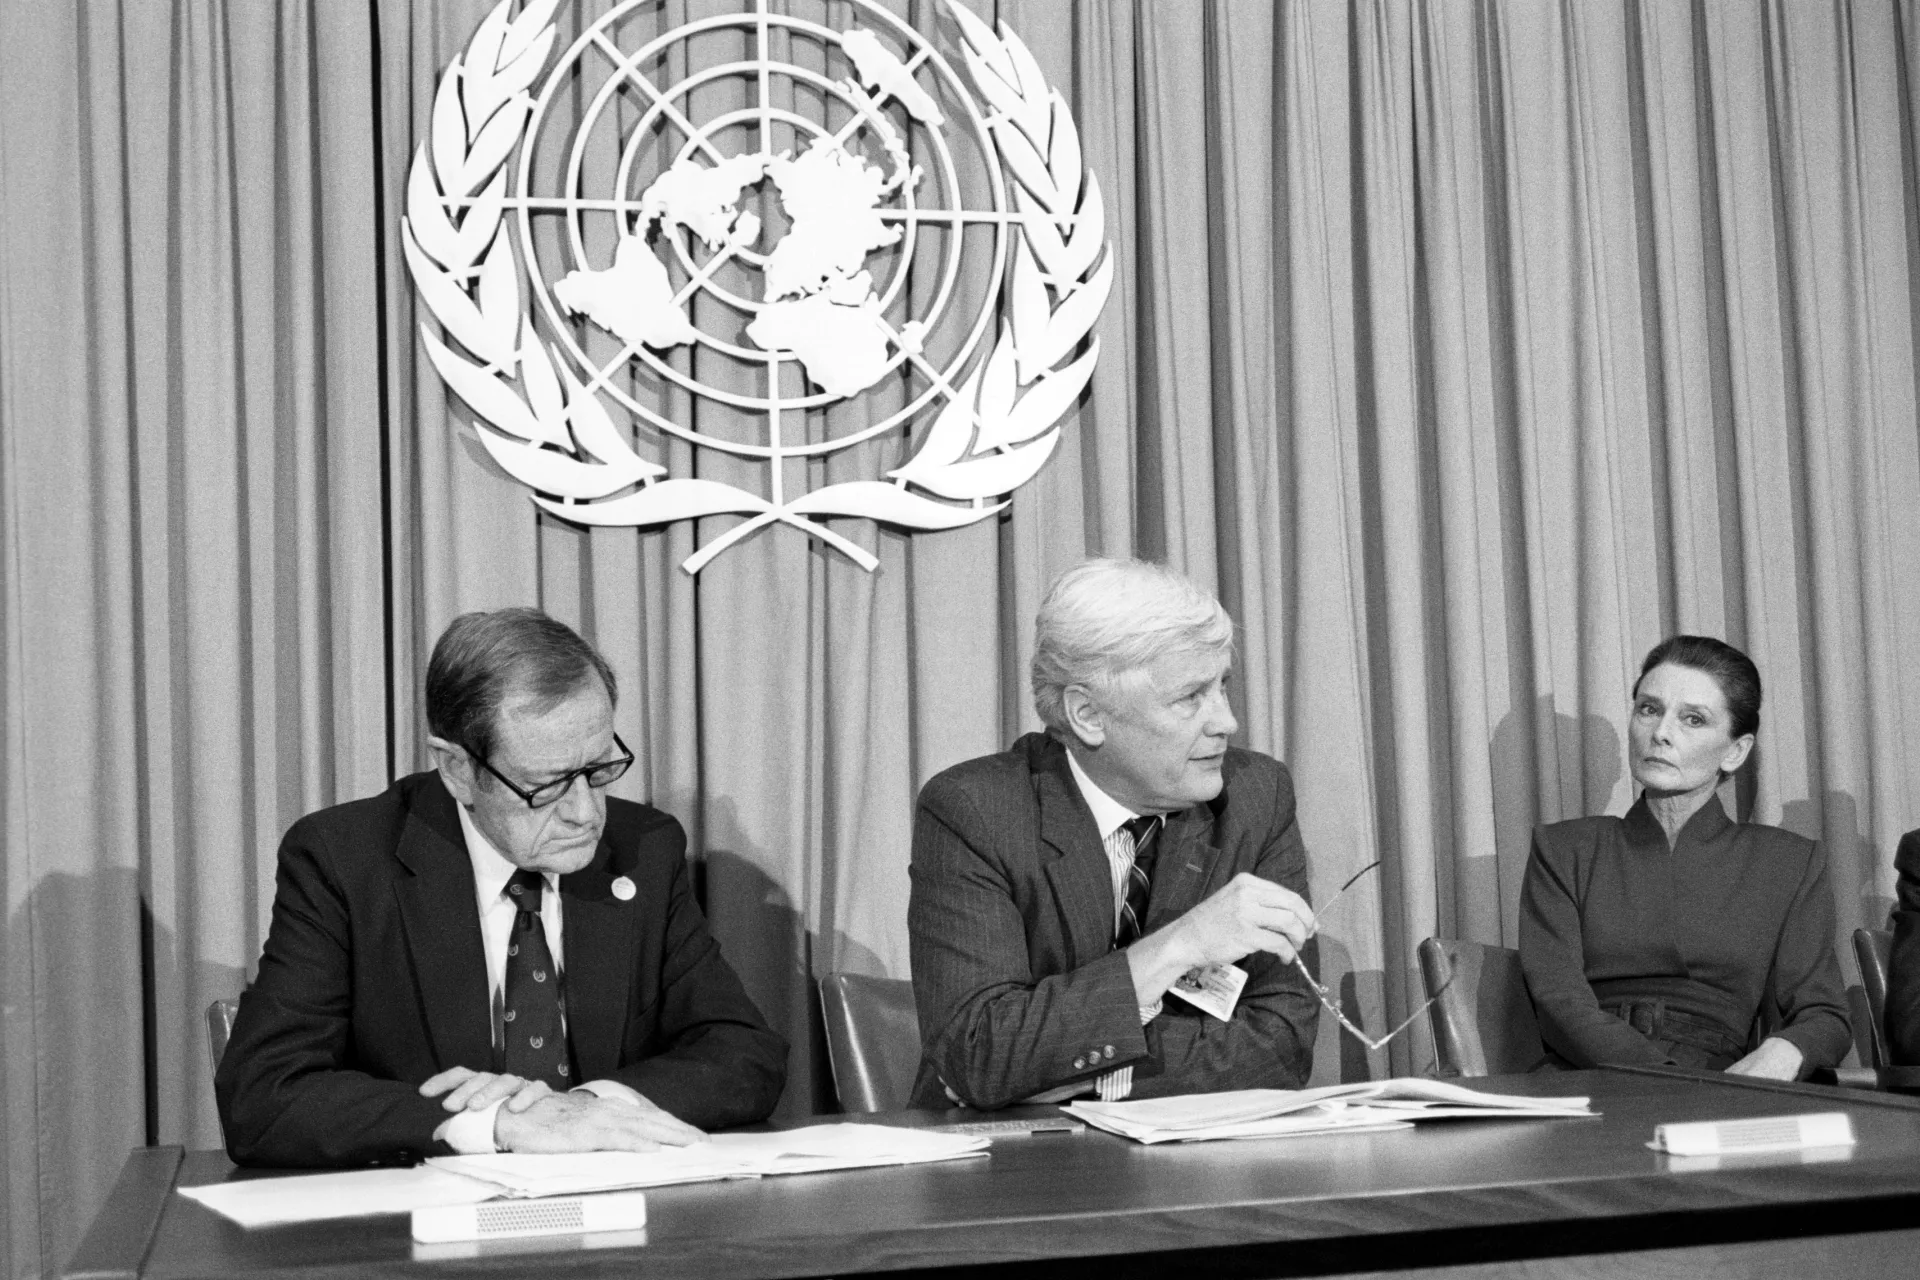 James Grant (Executive Director, UNICEF), Jan Martenson (Under-Secretary-General for Human Rights and Director, United Nations, Geneva) and Audrey Hepburn (Goodwill Ambassador of UNICEF) at a UNICEF press conference as the UN General Assembly adopts the Convention on the Rights of the Child.